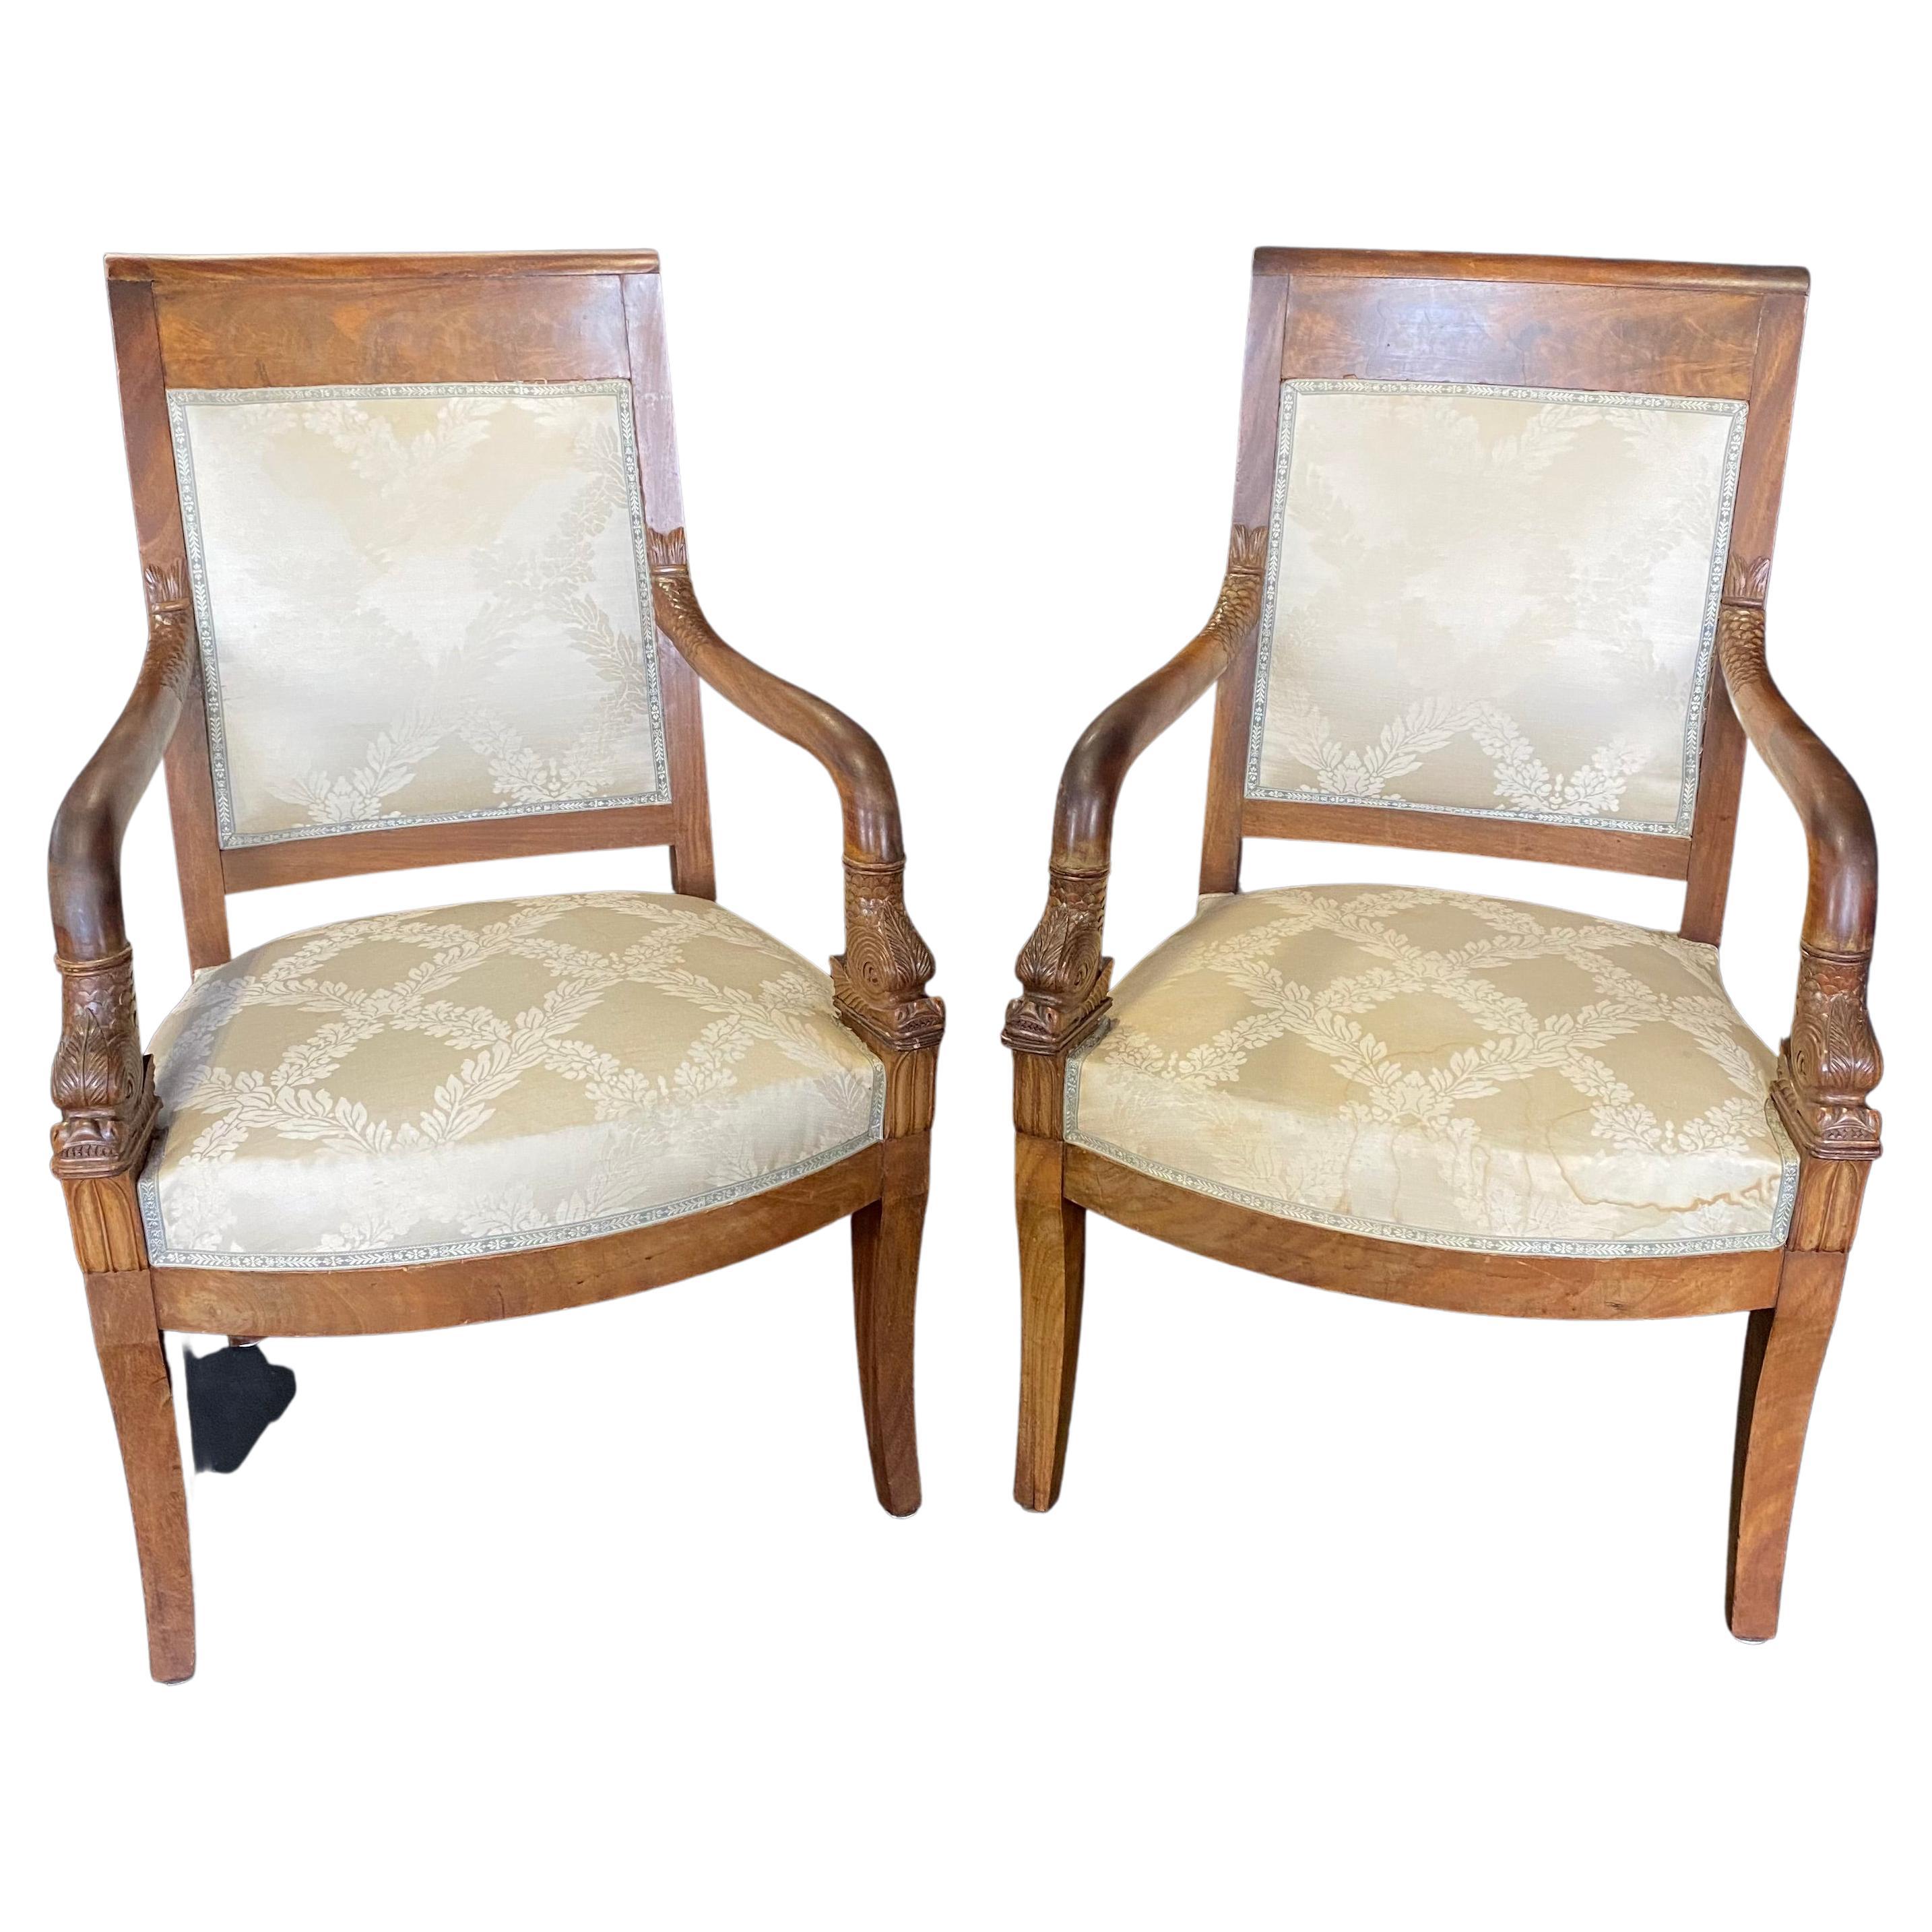 Gorgeous Pair of French Empire Carved Walnut Armchairs with Dolphin Armrests For Sale